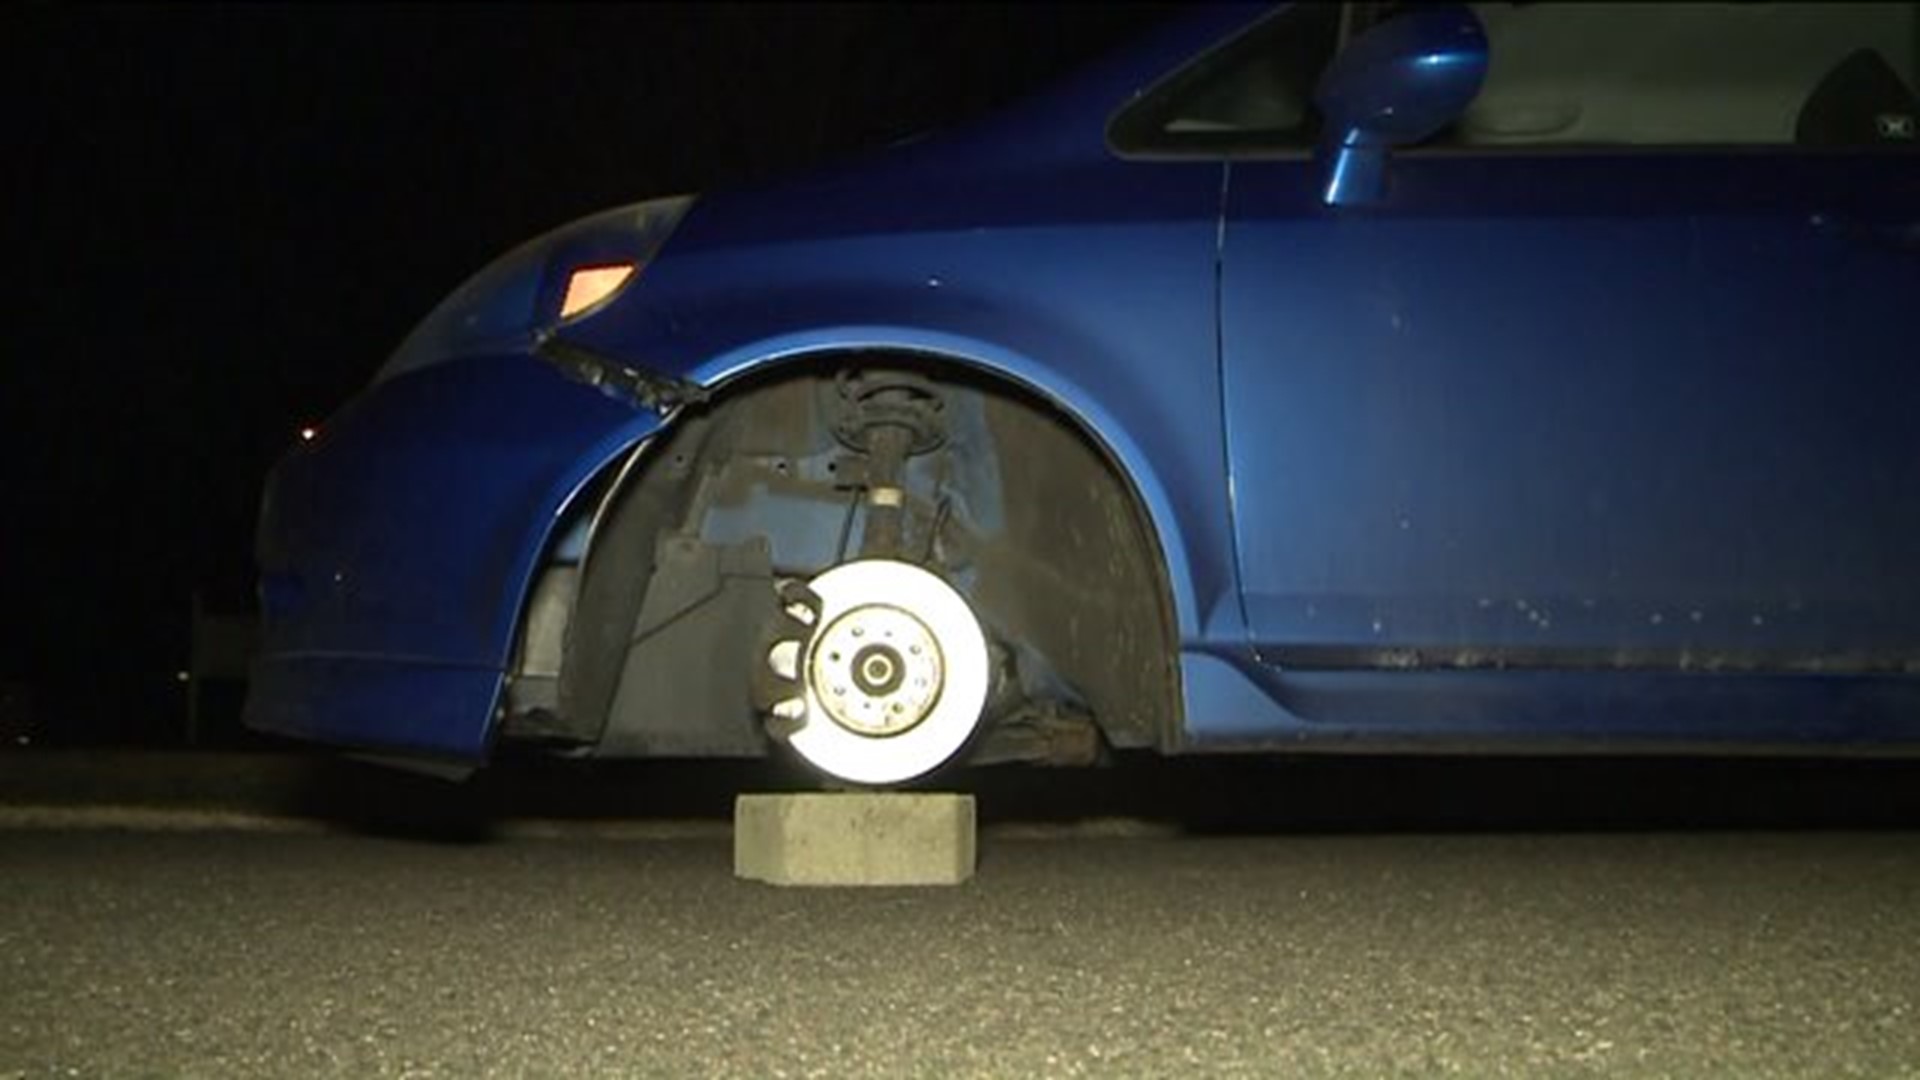 Police investigating theft of tires off of cars in Enfield